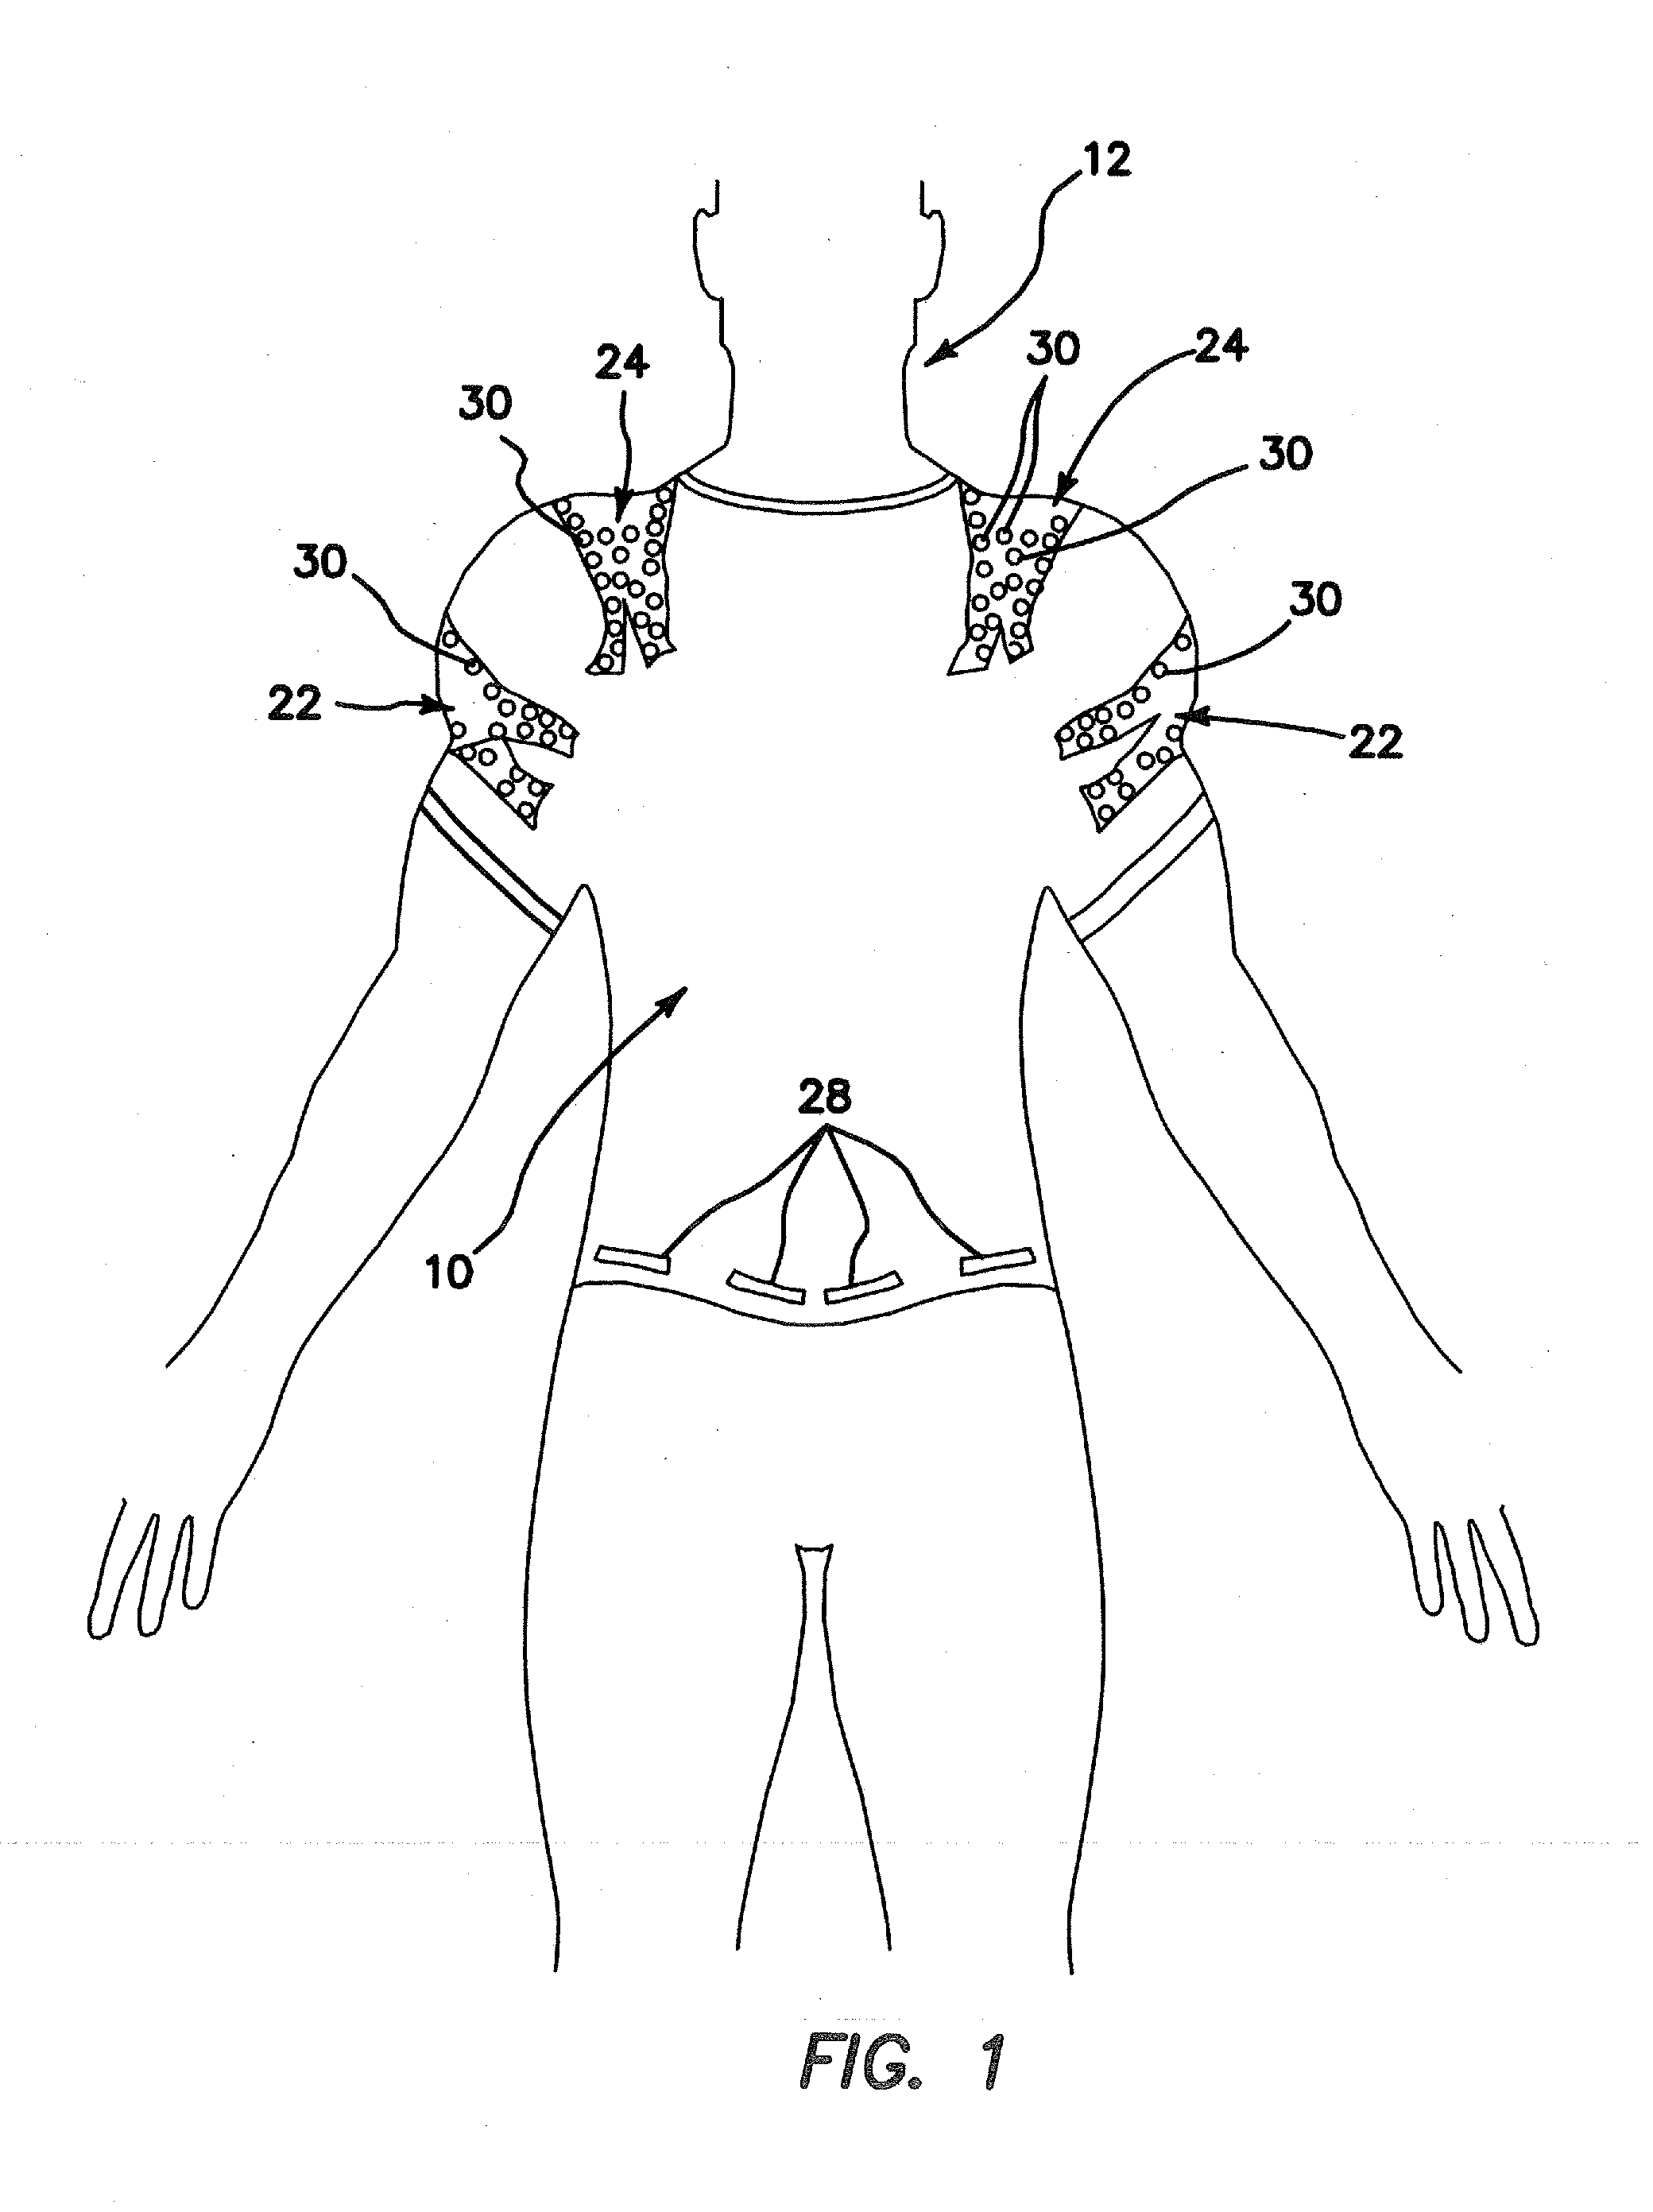 Posture improvement devices and methods for use